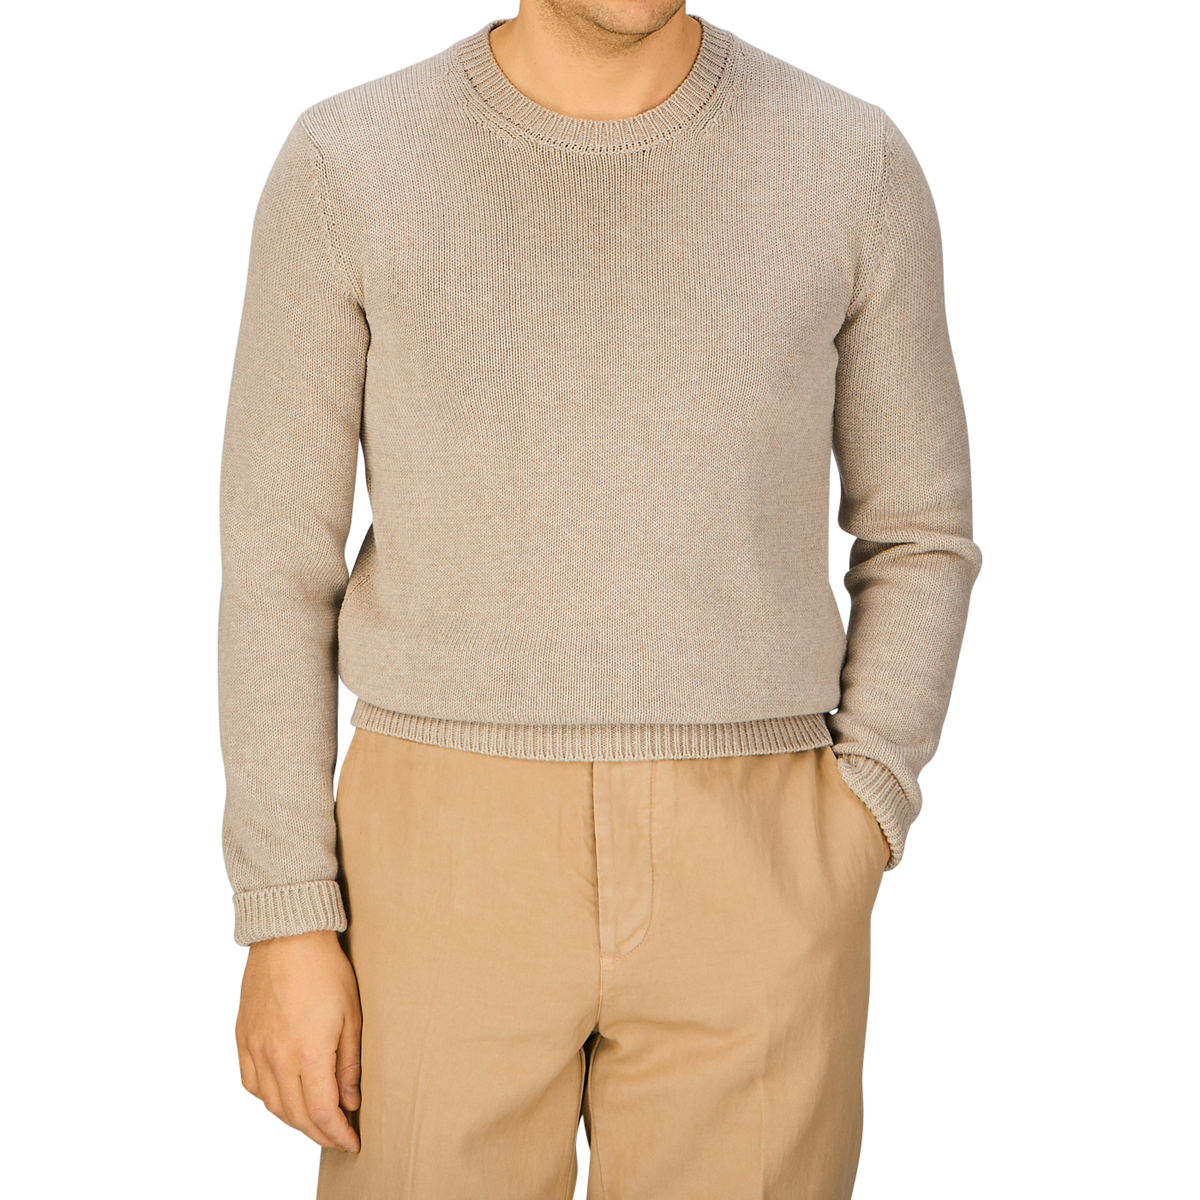 A man wearing a Zanone taupe beige cotton crew neck sweater and tan pants.